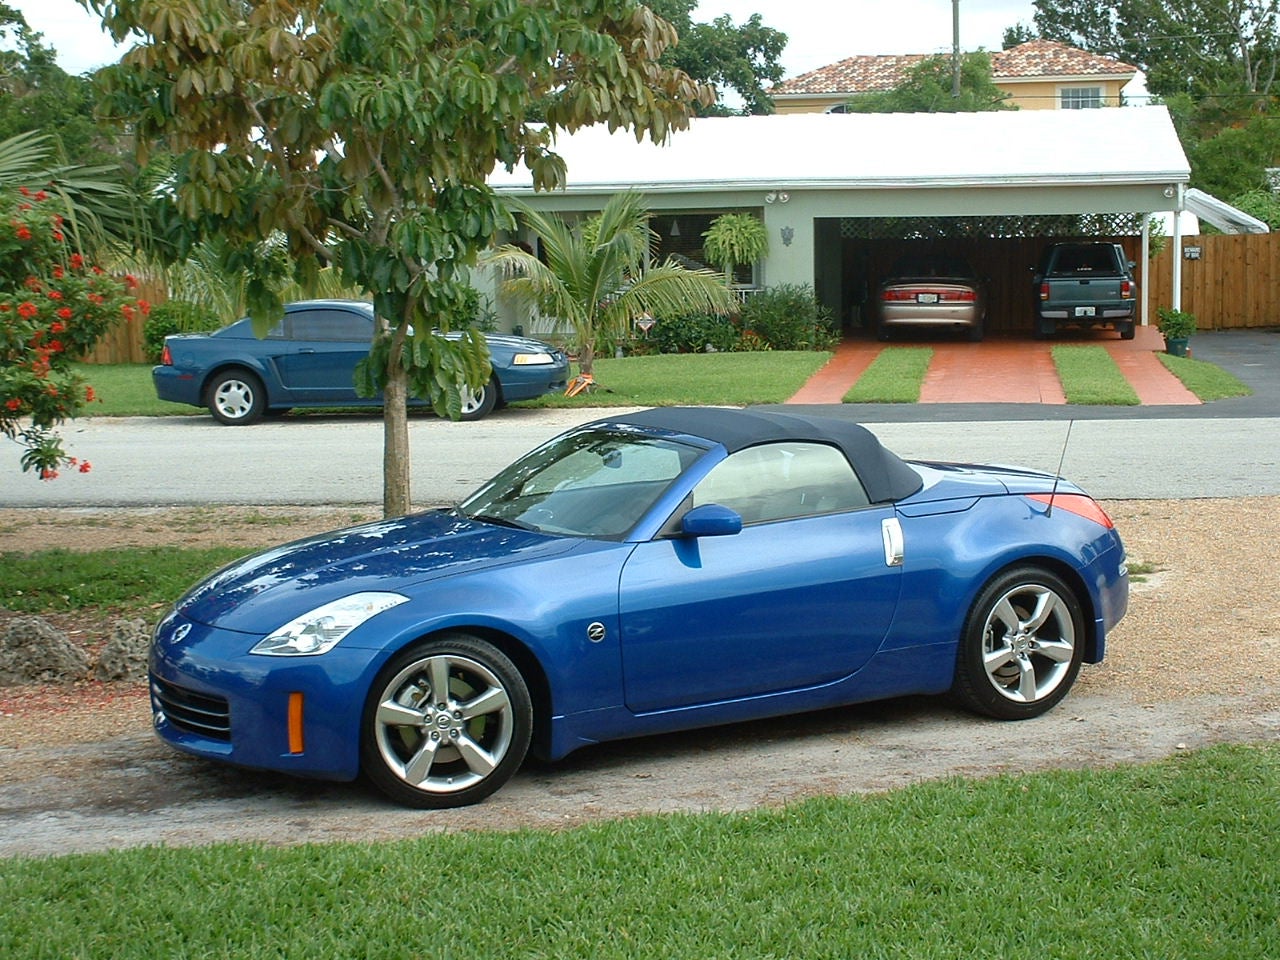 2006 Nissan 350z touring roadster reviews #6